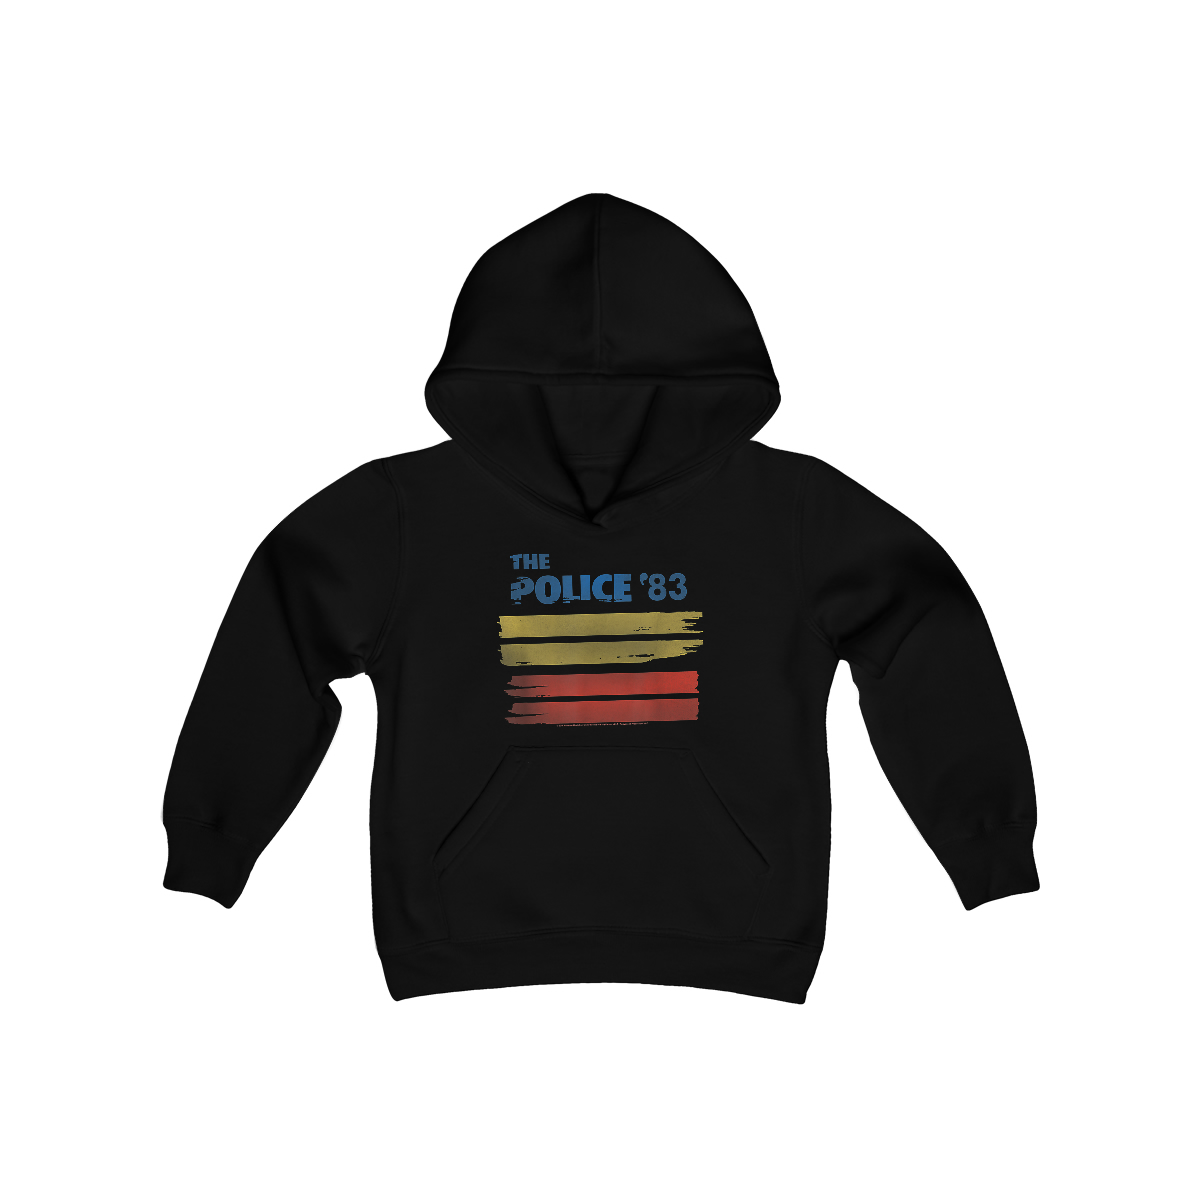 THE POLICE 83 Shirt Youth Heavy Blend Hooded Sweatshirt